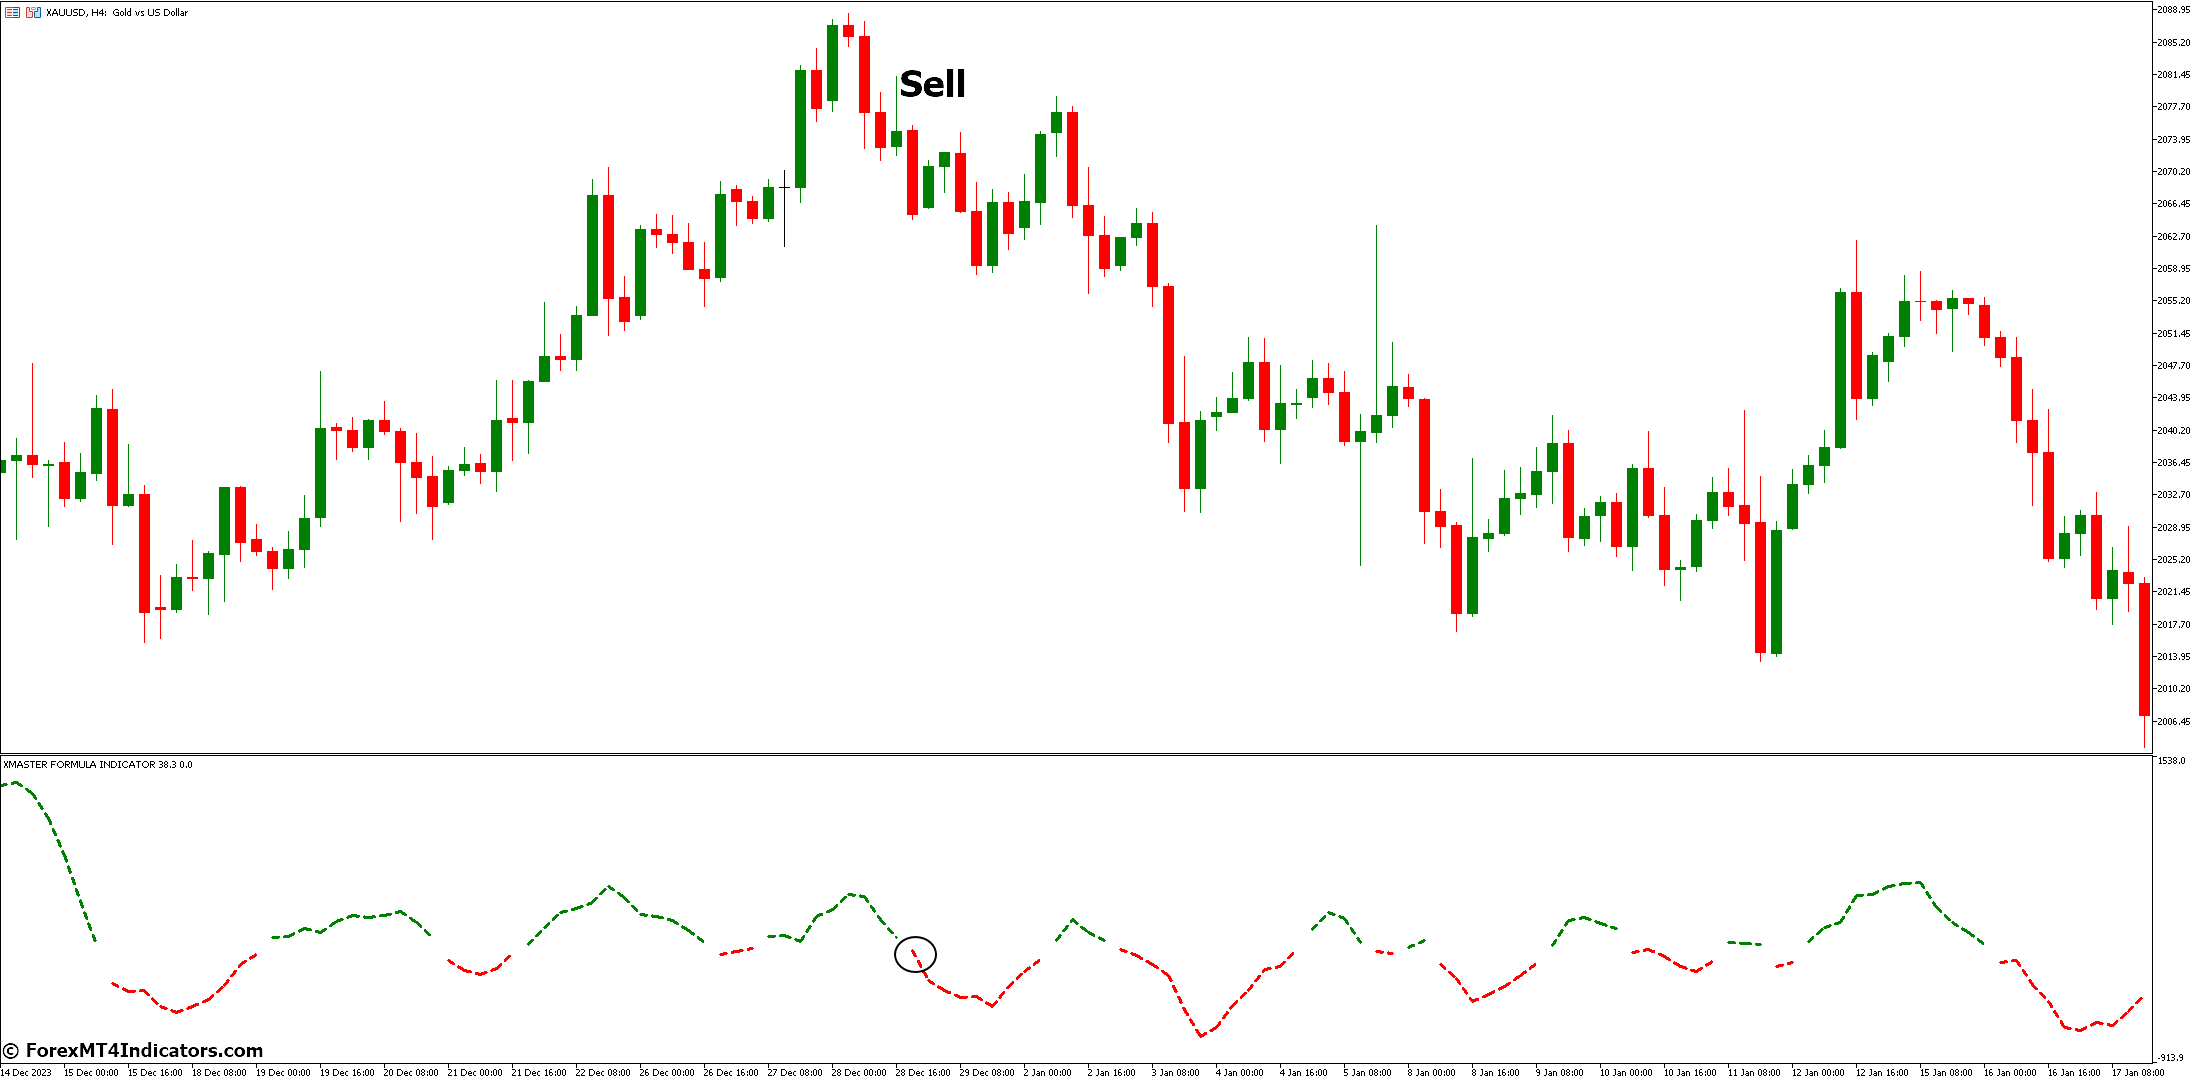 How to Trade with Xmaster Formula Indicator - Sell Entry